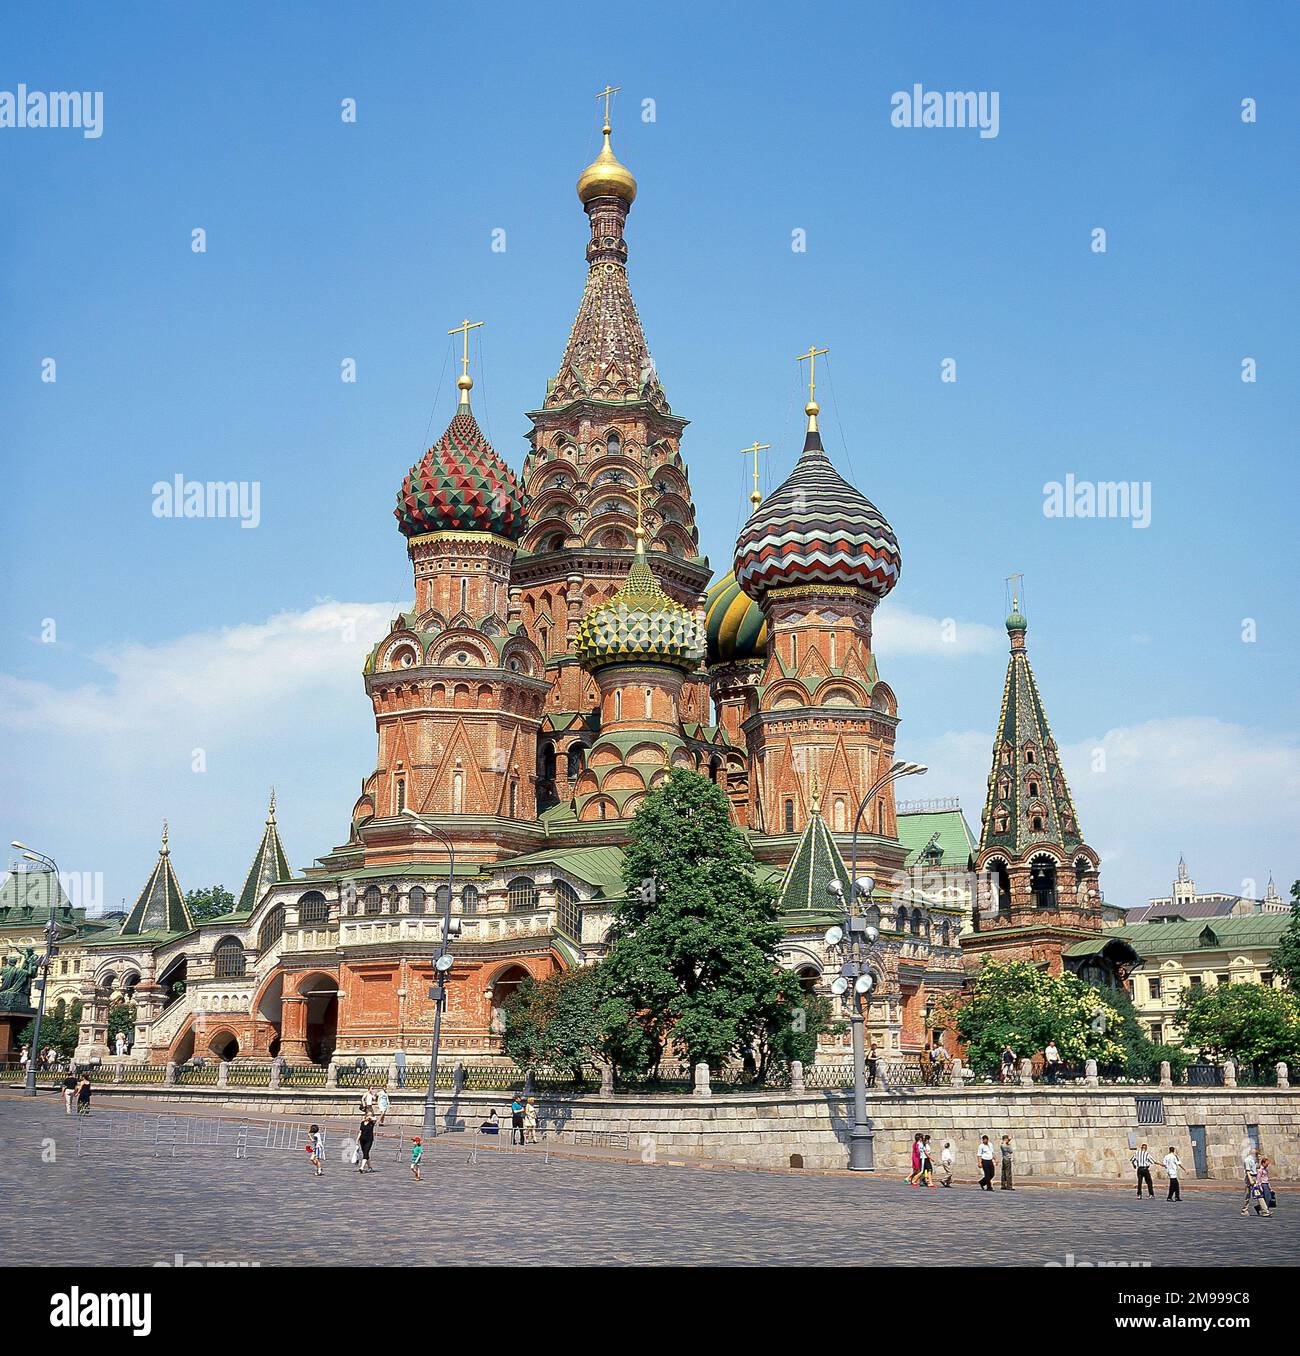 St Basil's Cathedral and Kremlin, Red Square, Moscow, Central District, Russia Stock Photo